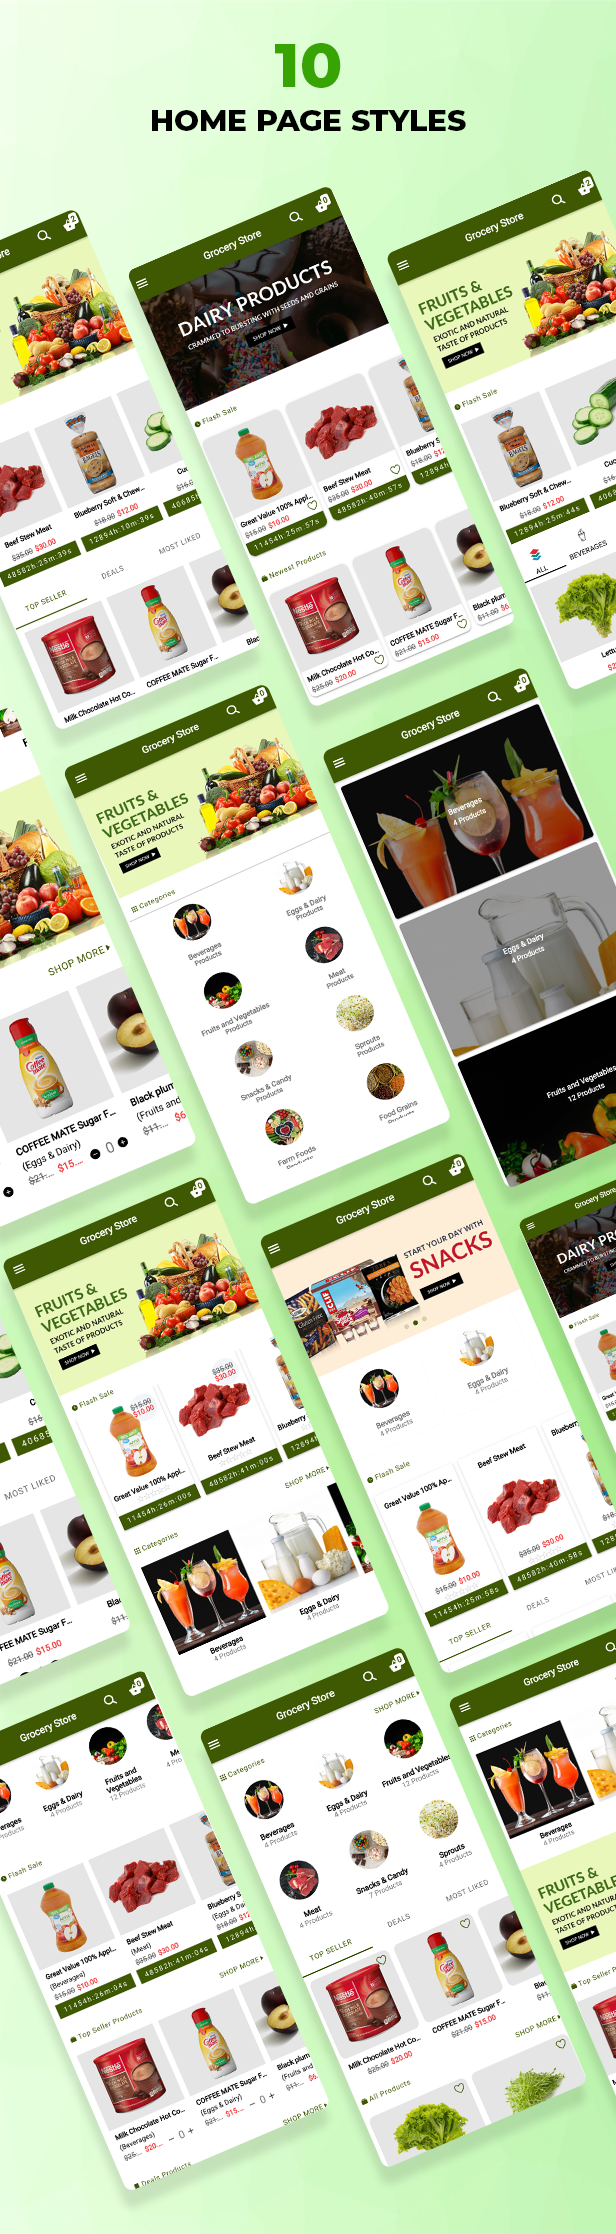 Ecommerce Solution with Delivery App For Grocery, Food, Pharmacy, Any Store / Laravel + Android Apps - 39